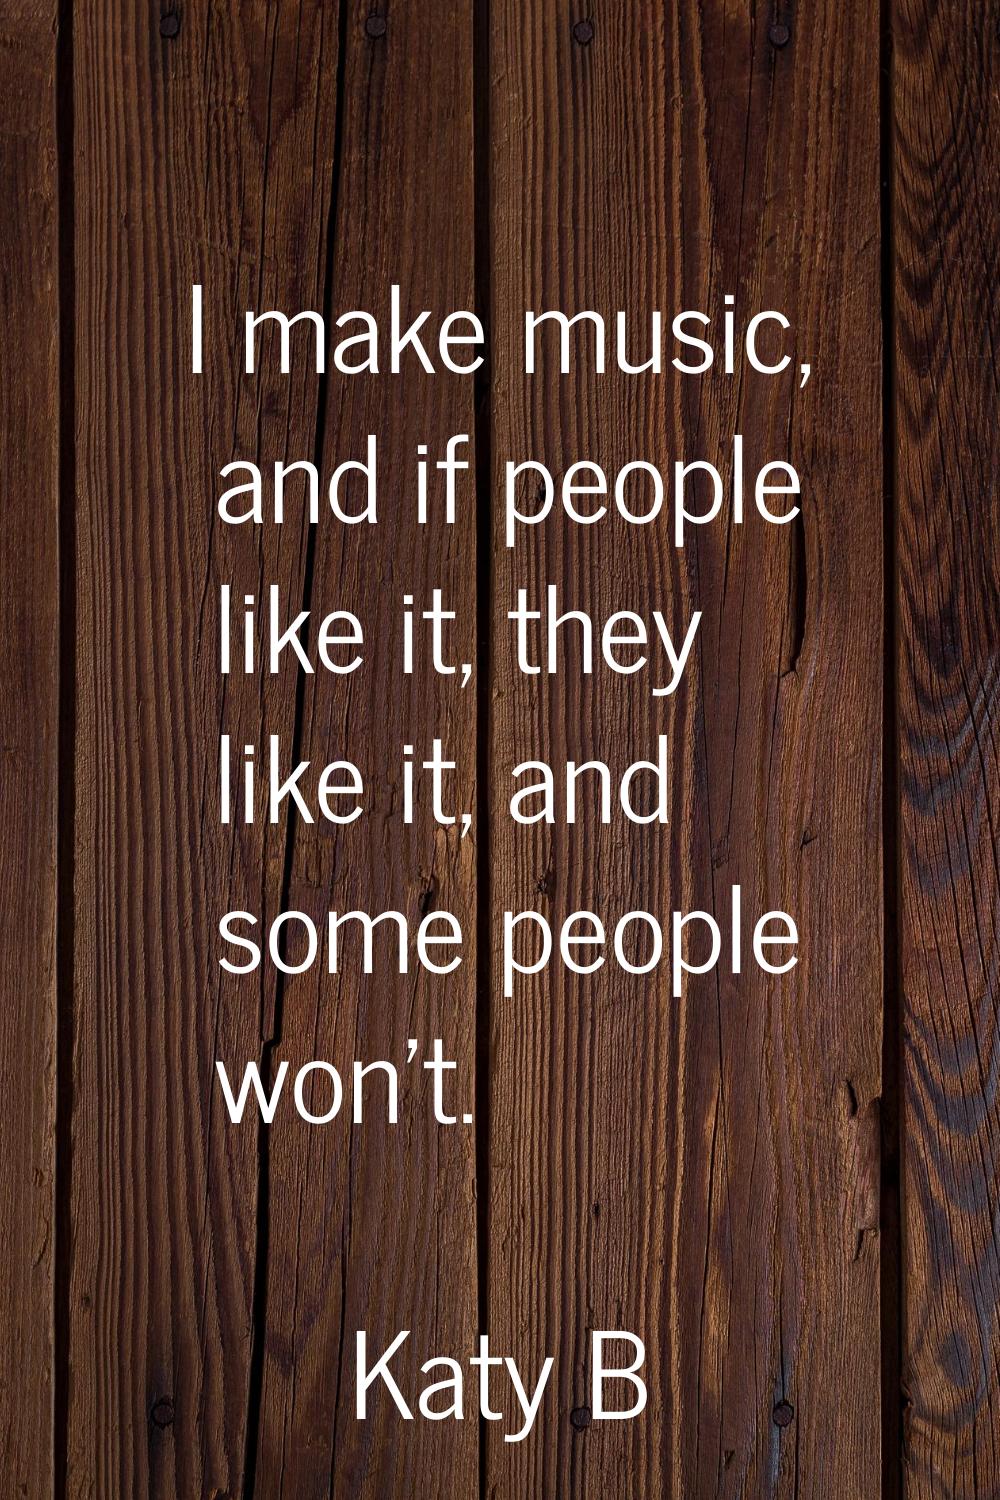 I make music, and if people like it, they like it, and some people won't.